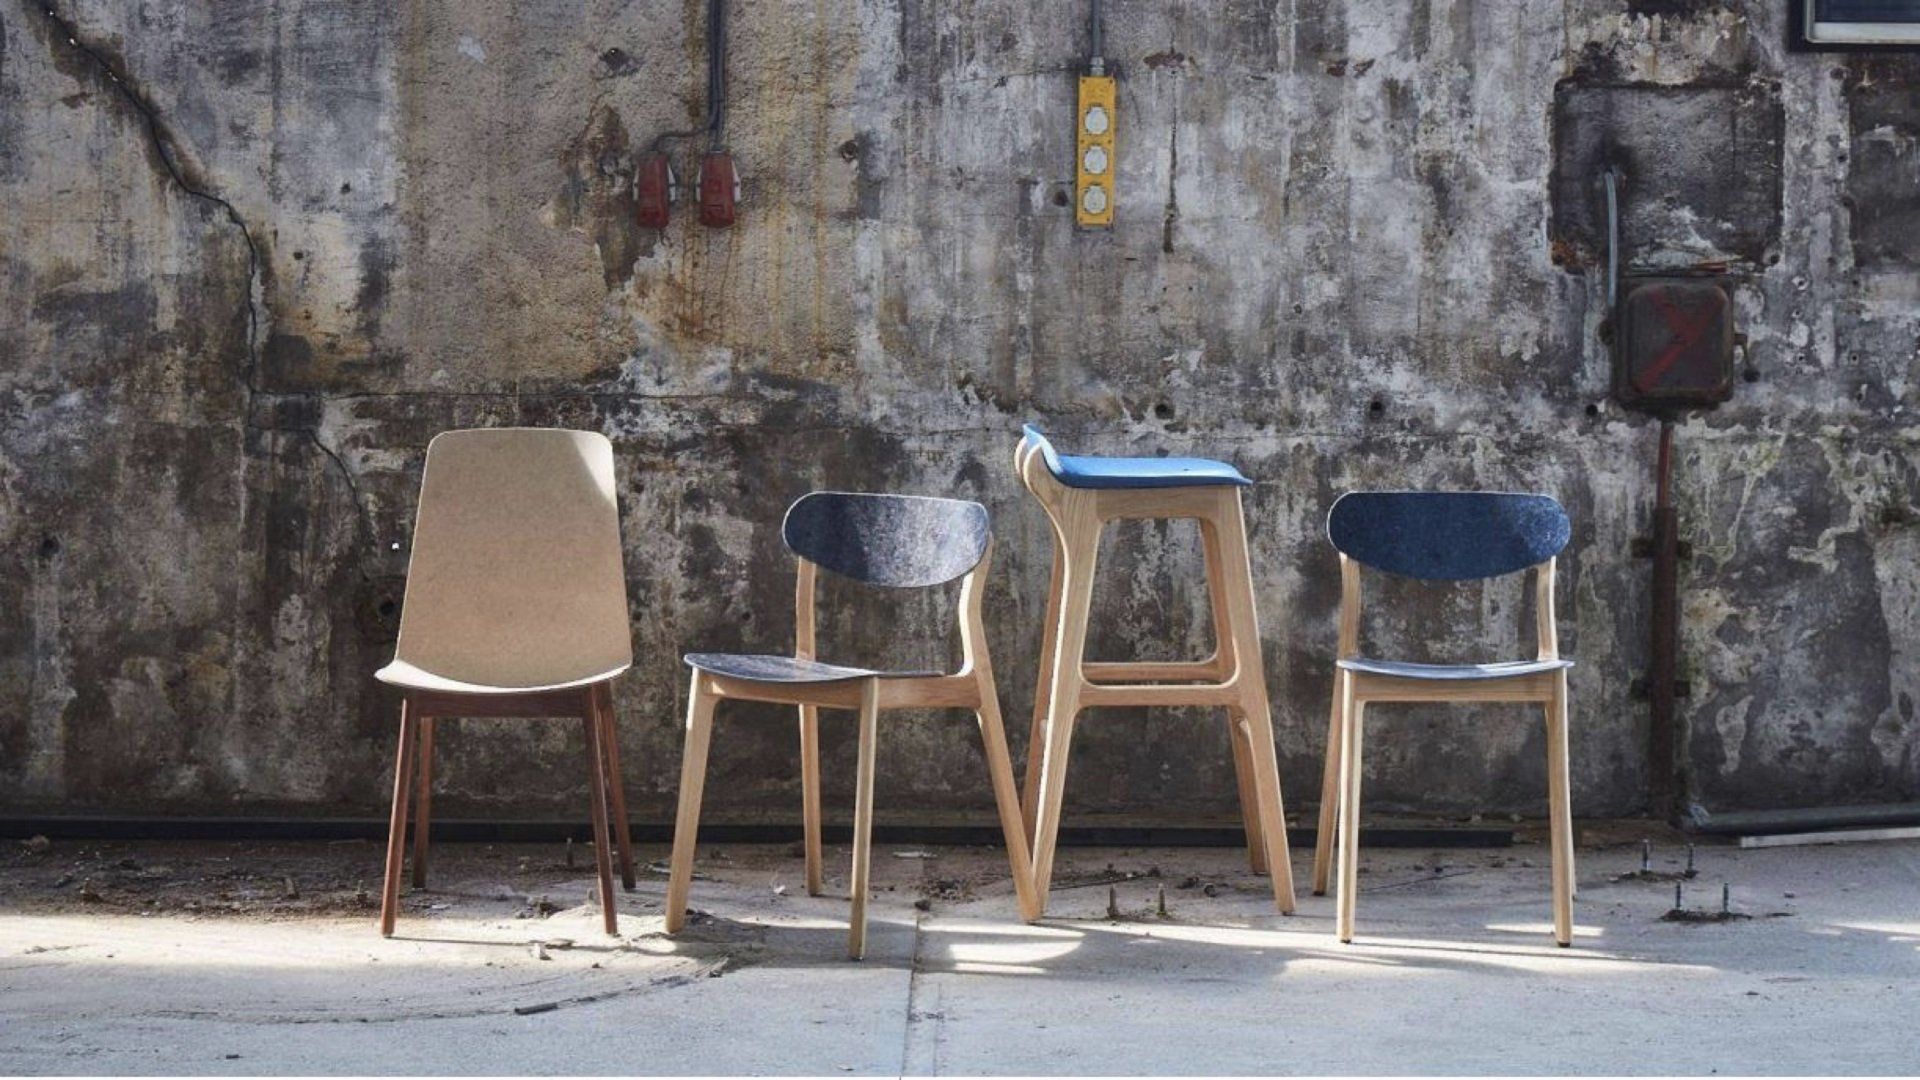 Wooden leg chairs and stools upholstered using recycled denim fabric.